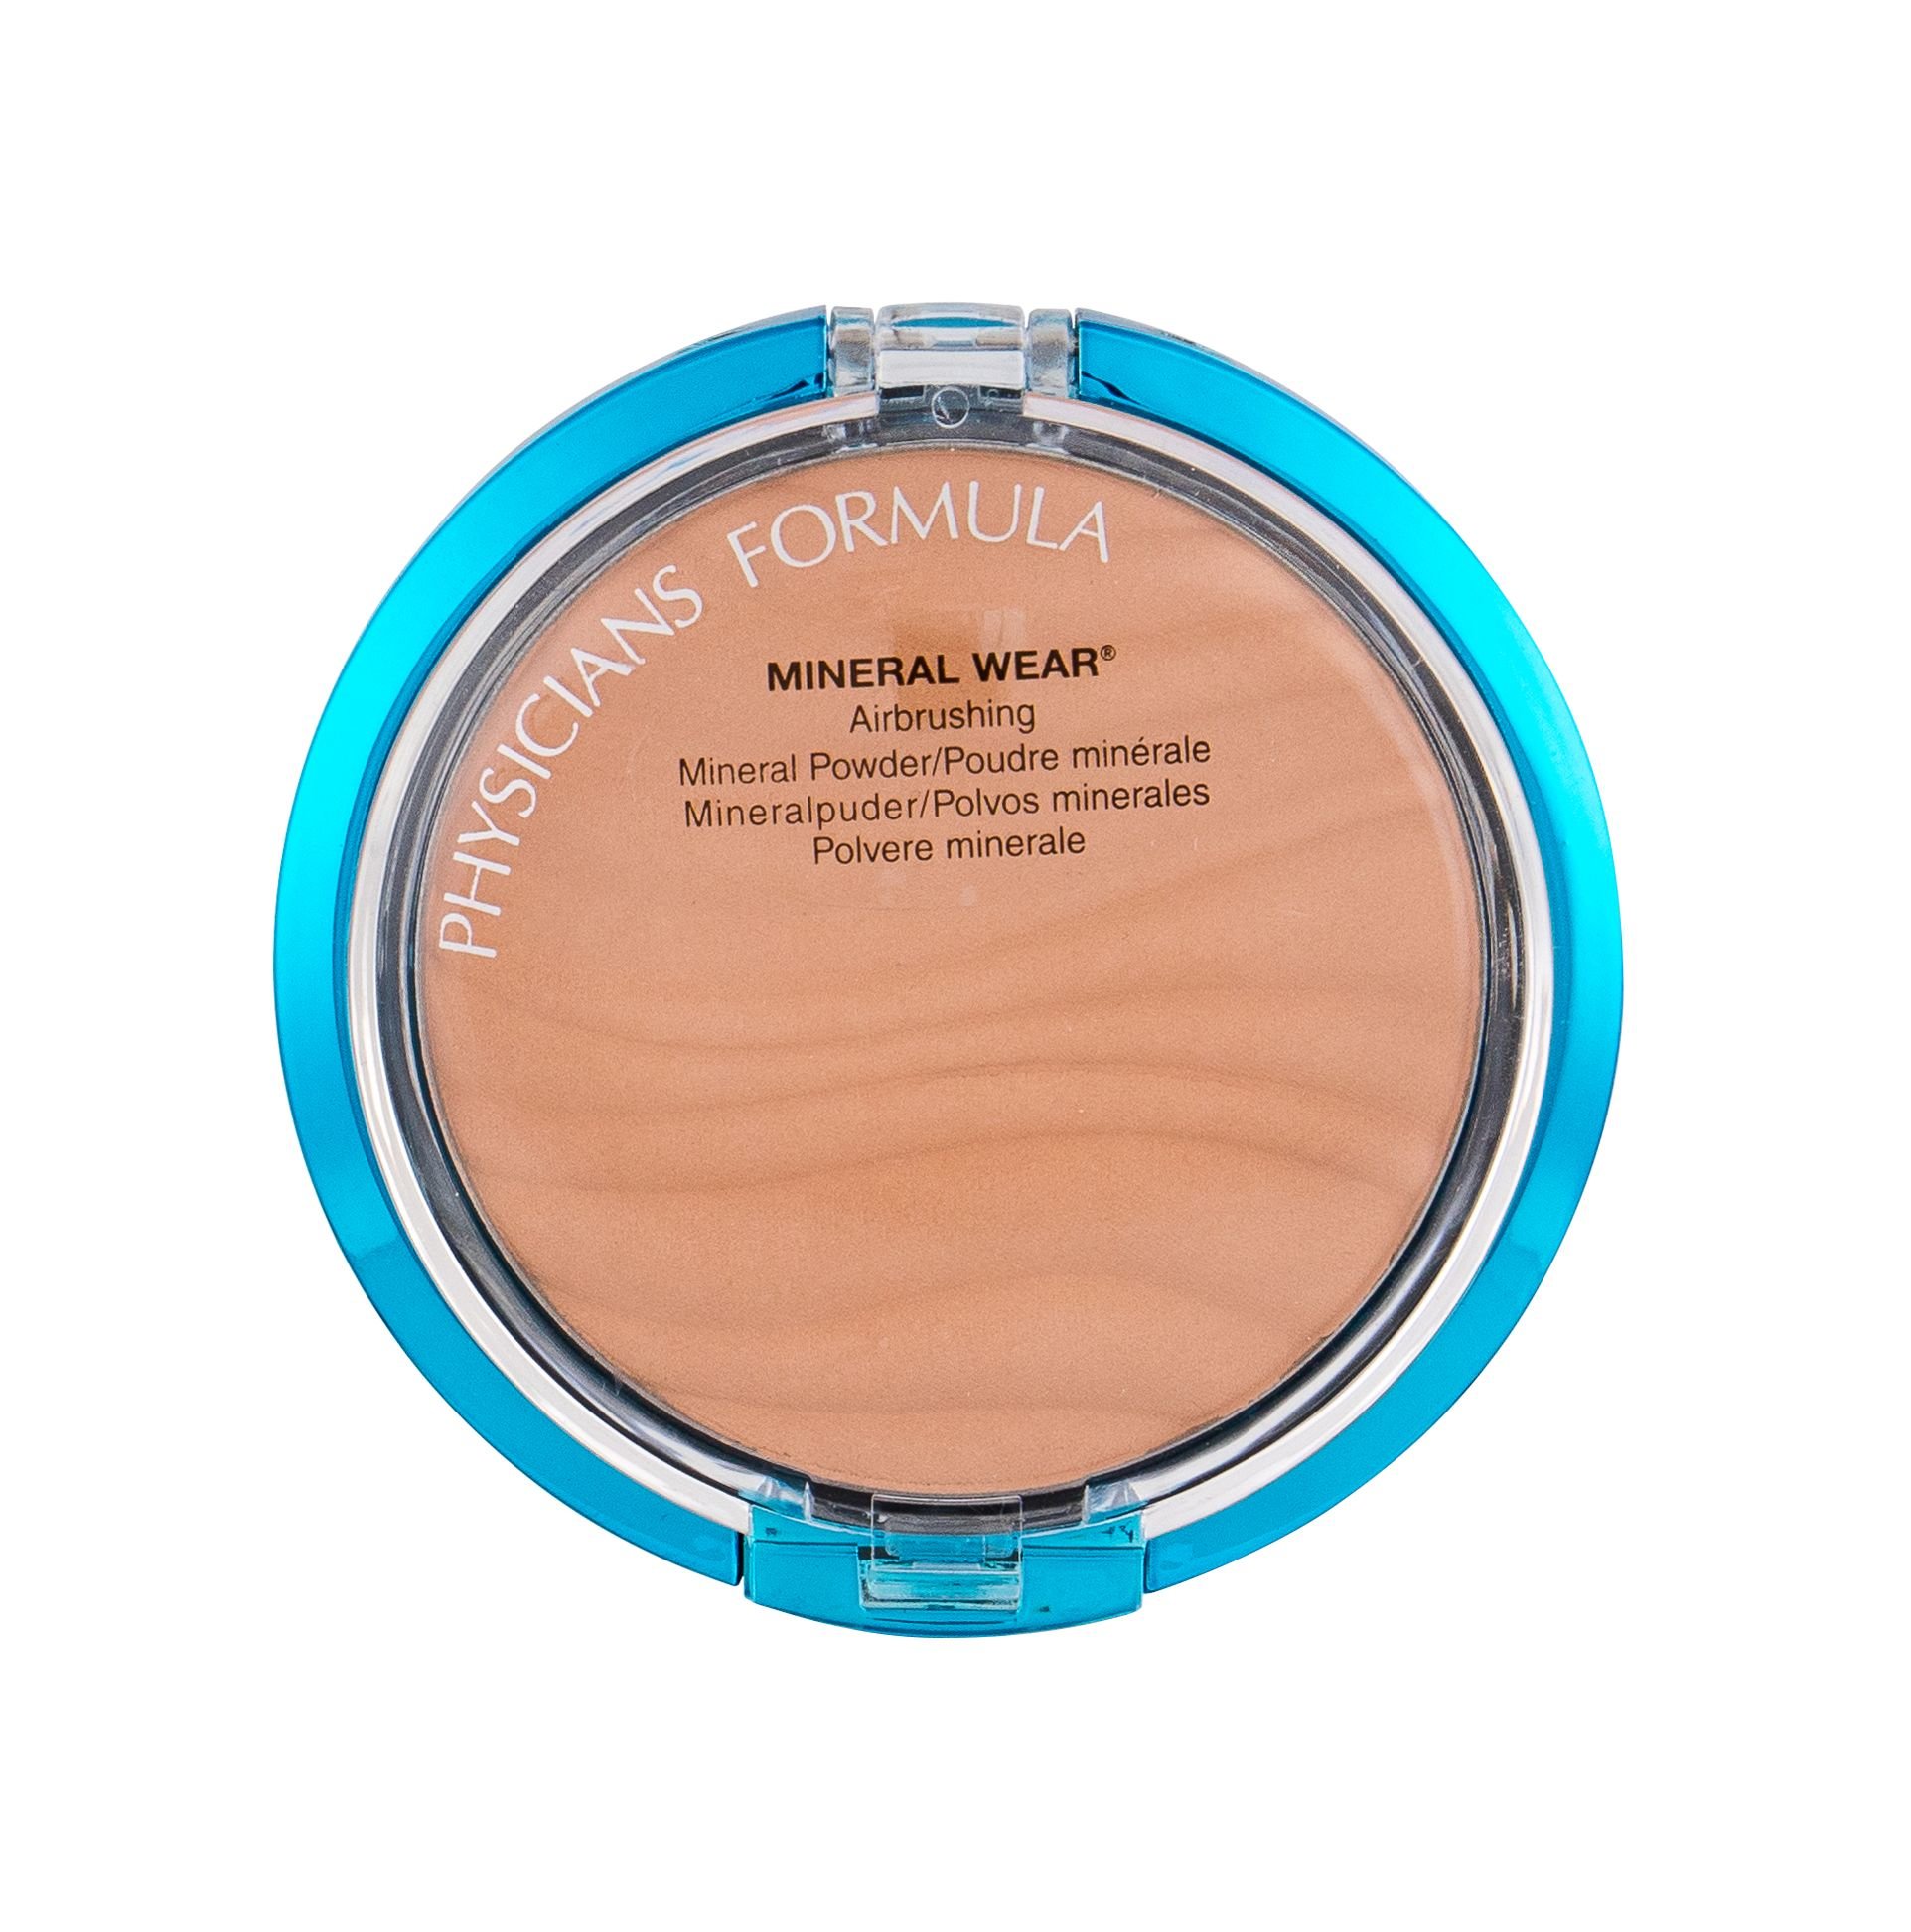 Physicians Formula Mineral Wear Airbrushing Pressed Powder sausa pudra